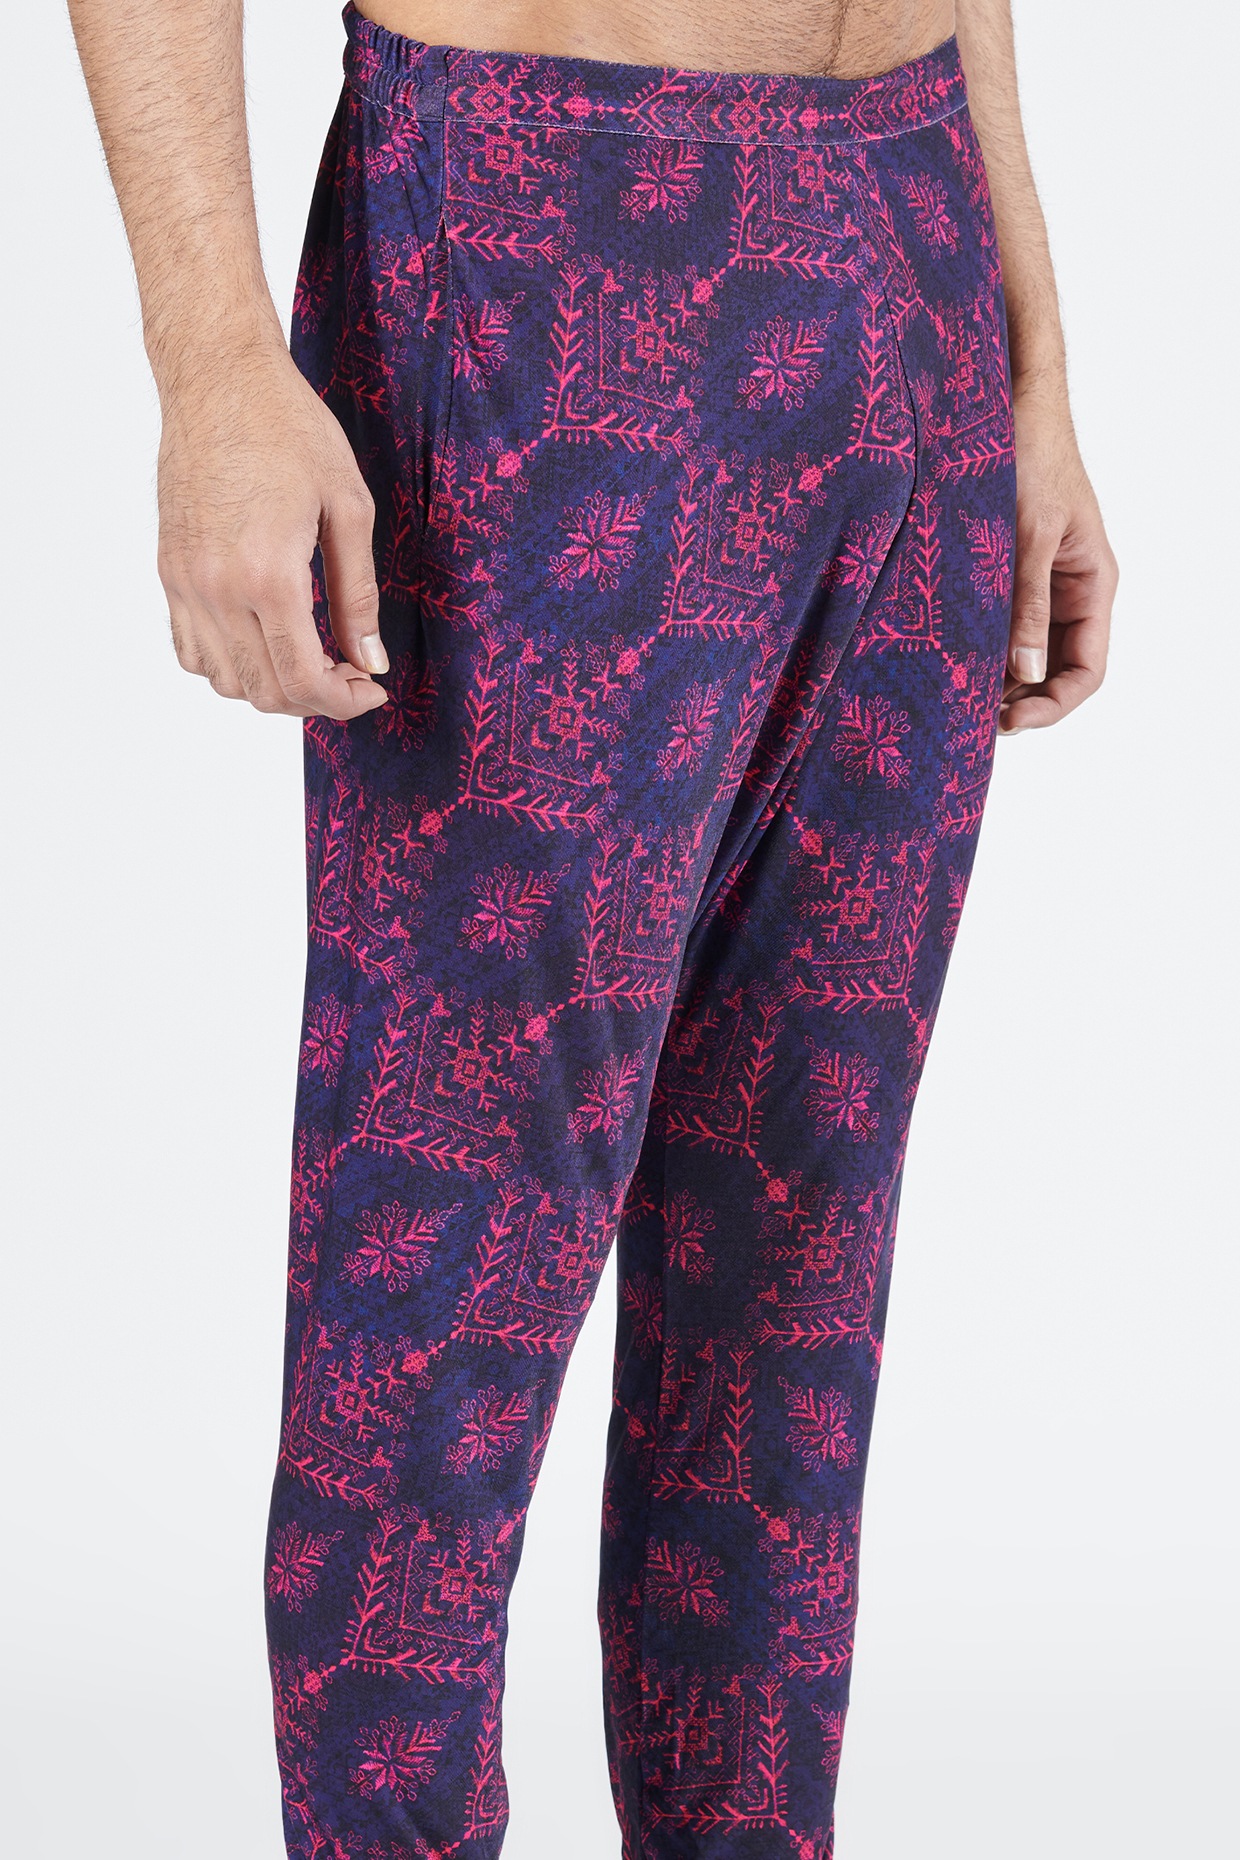 Buy Pink Blue and White Ankle Women Pant Cotton Ikat for Best Price,  Reviews, Free Shipping